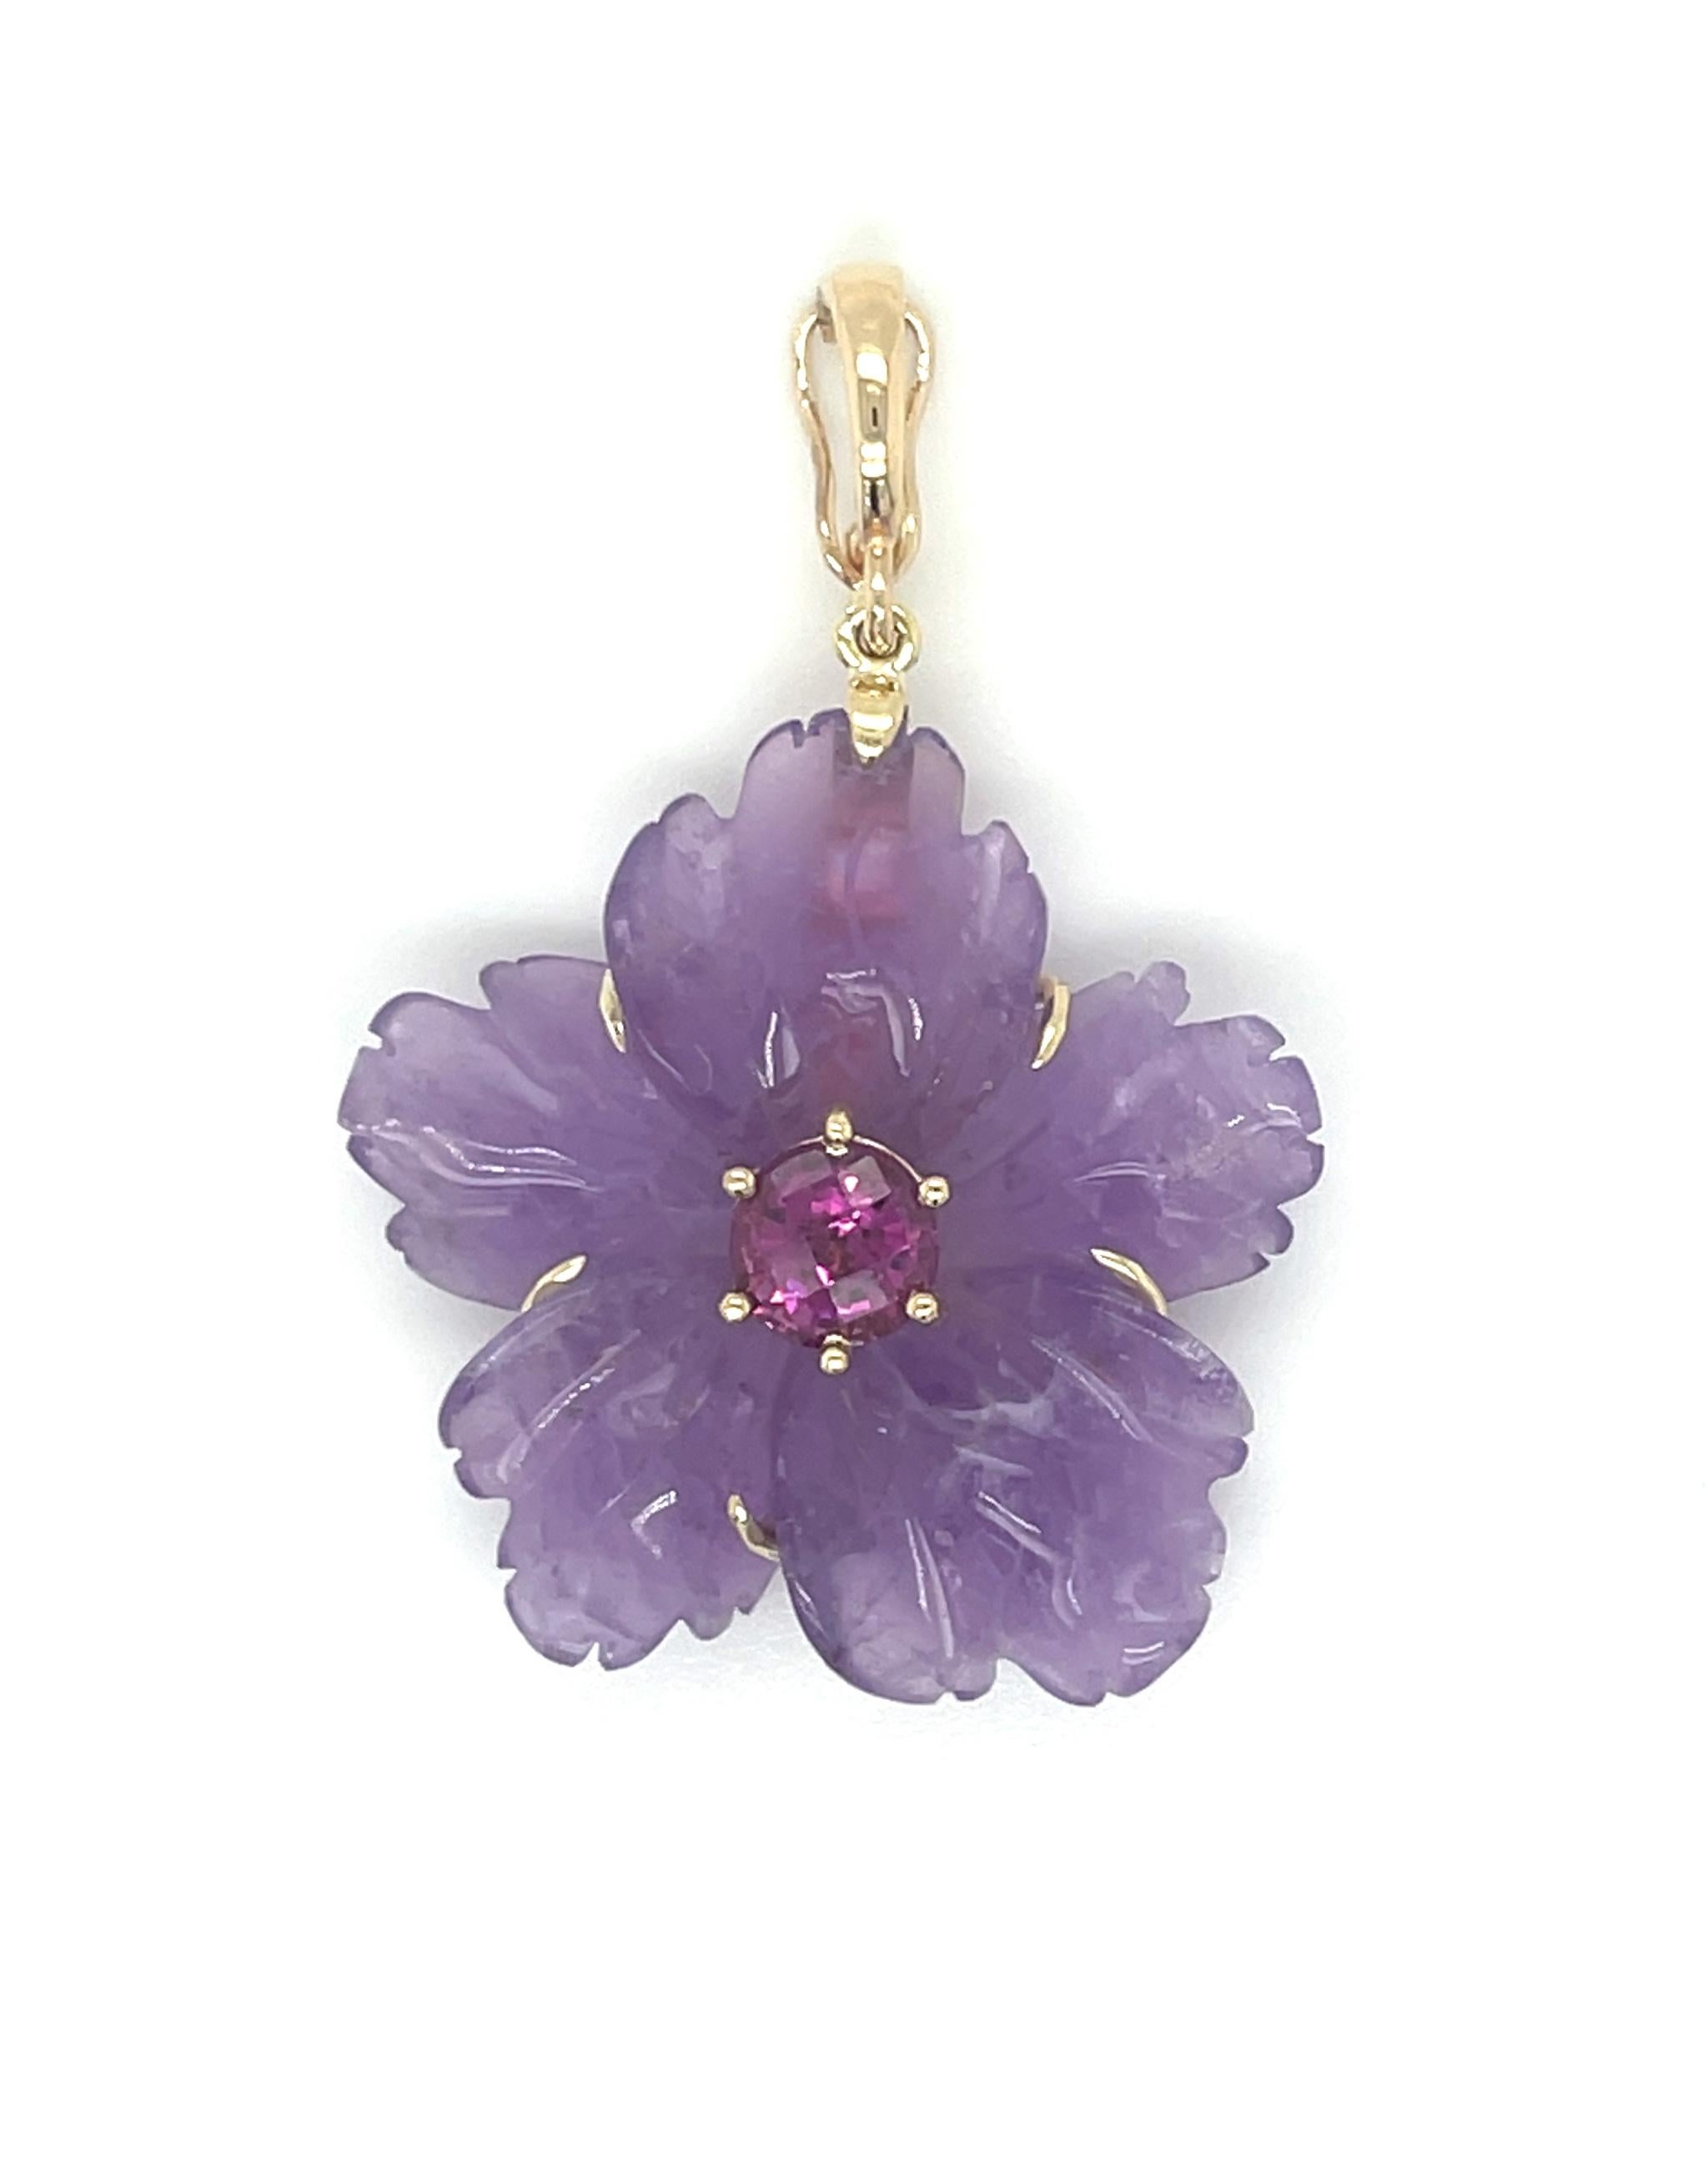 This eye-catching necklace features a gorgeous amethyst pendant set in 18k yellow gold on a strand of pearls and pink tourmaline beads. The flower pendant has been hand carved from a single amethyst crystal with lovely medium purple color. The